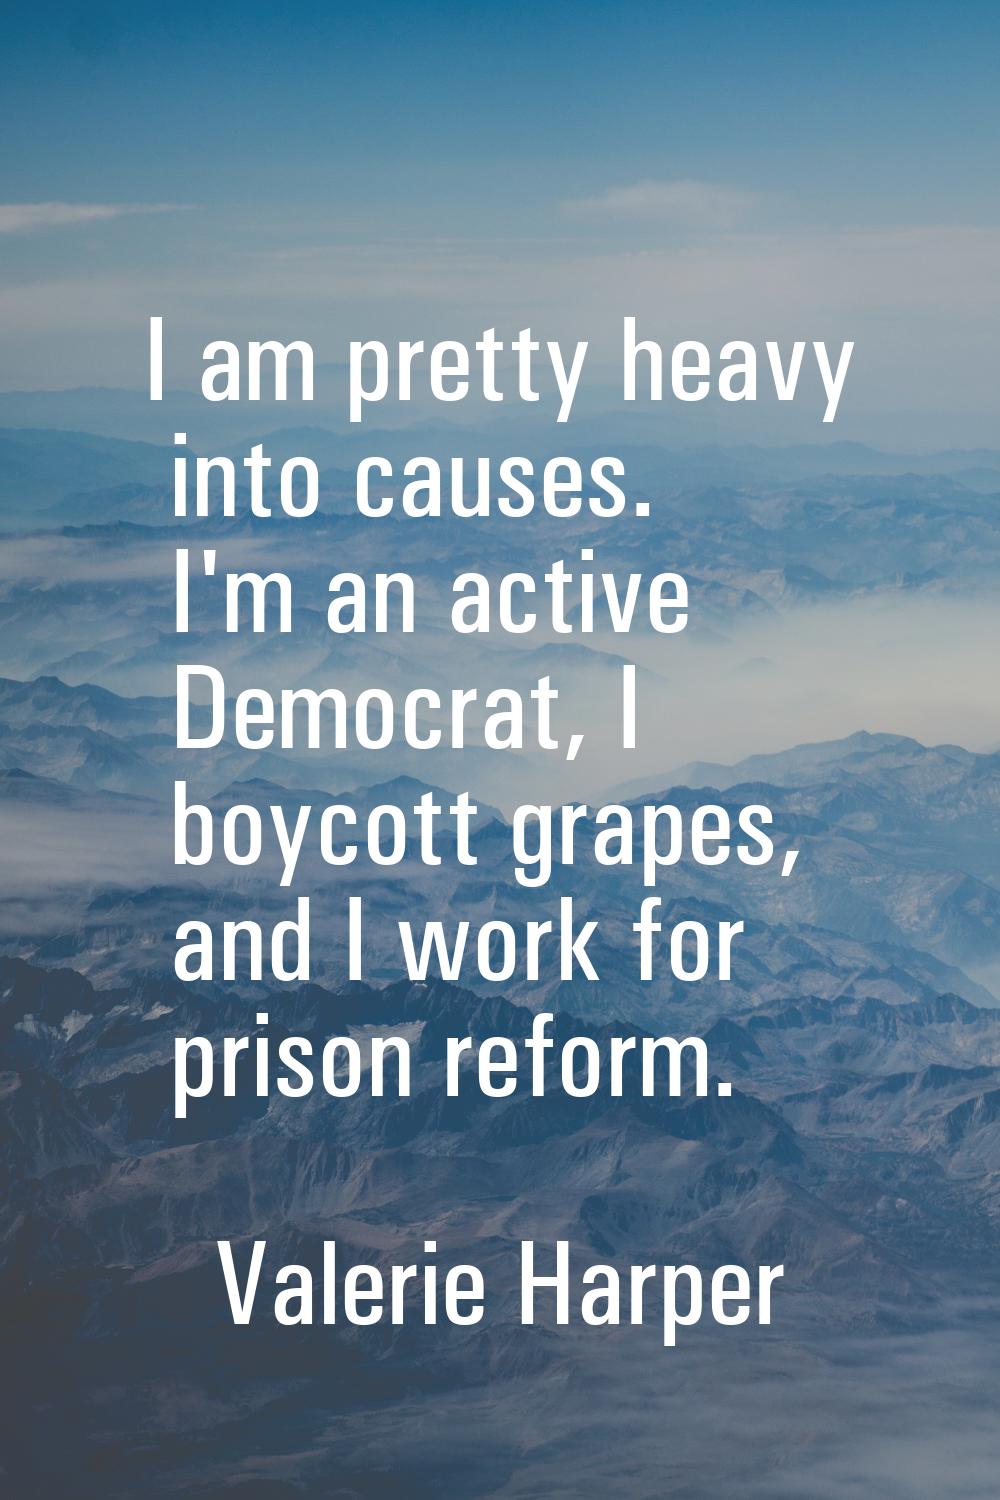 I am pretty heavy into causes. I'm an active Democrat, I boycott grapes, and I work for prison refo